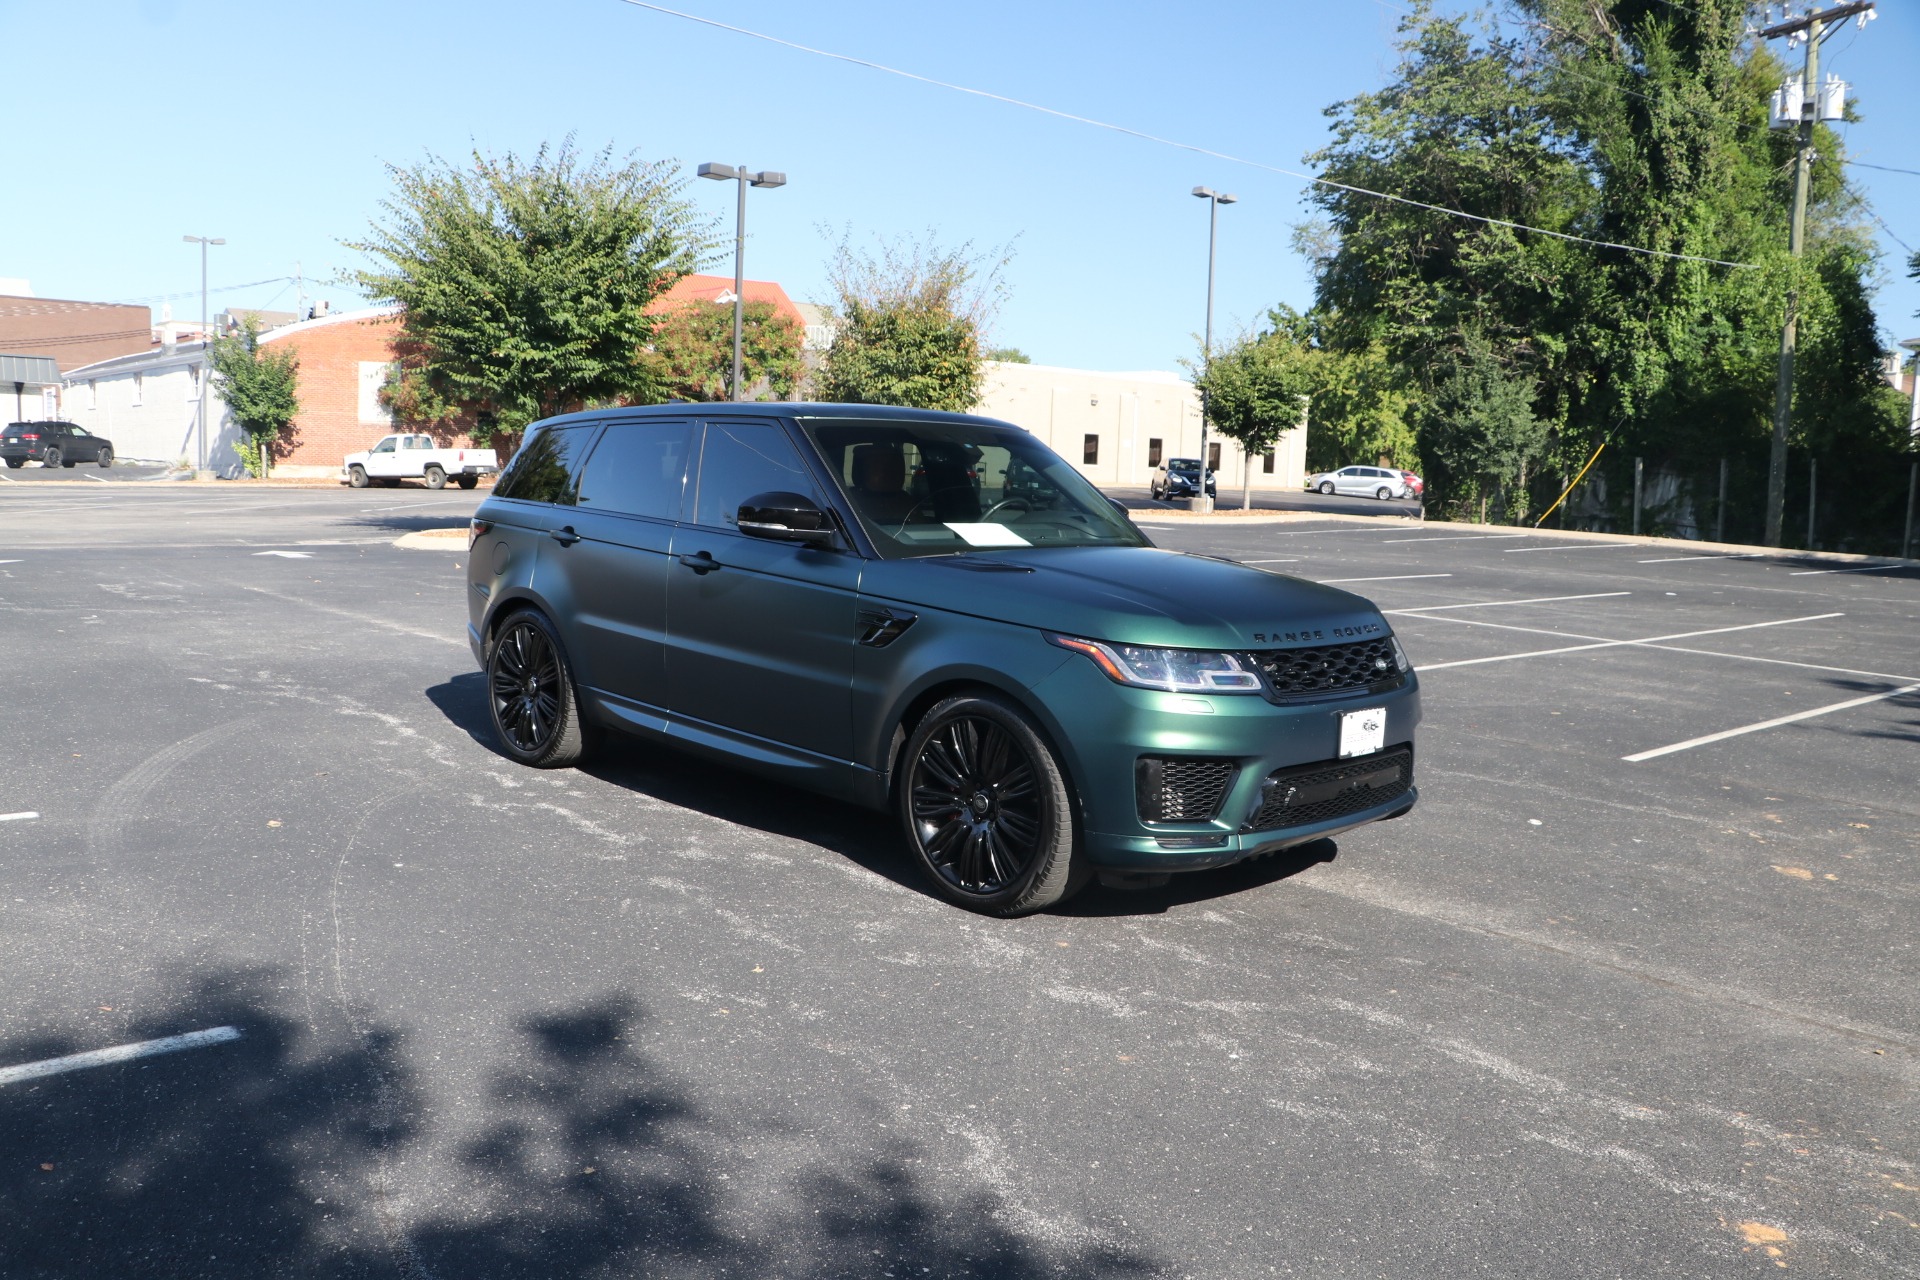 Used 2020 Land Rover Range Rover Sport P525 Autobiography W/Svo Special Effect Paint In Satin Finish Package for sale Sold at Auto Collection in Murfreesboro TN 37130 1